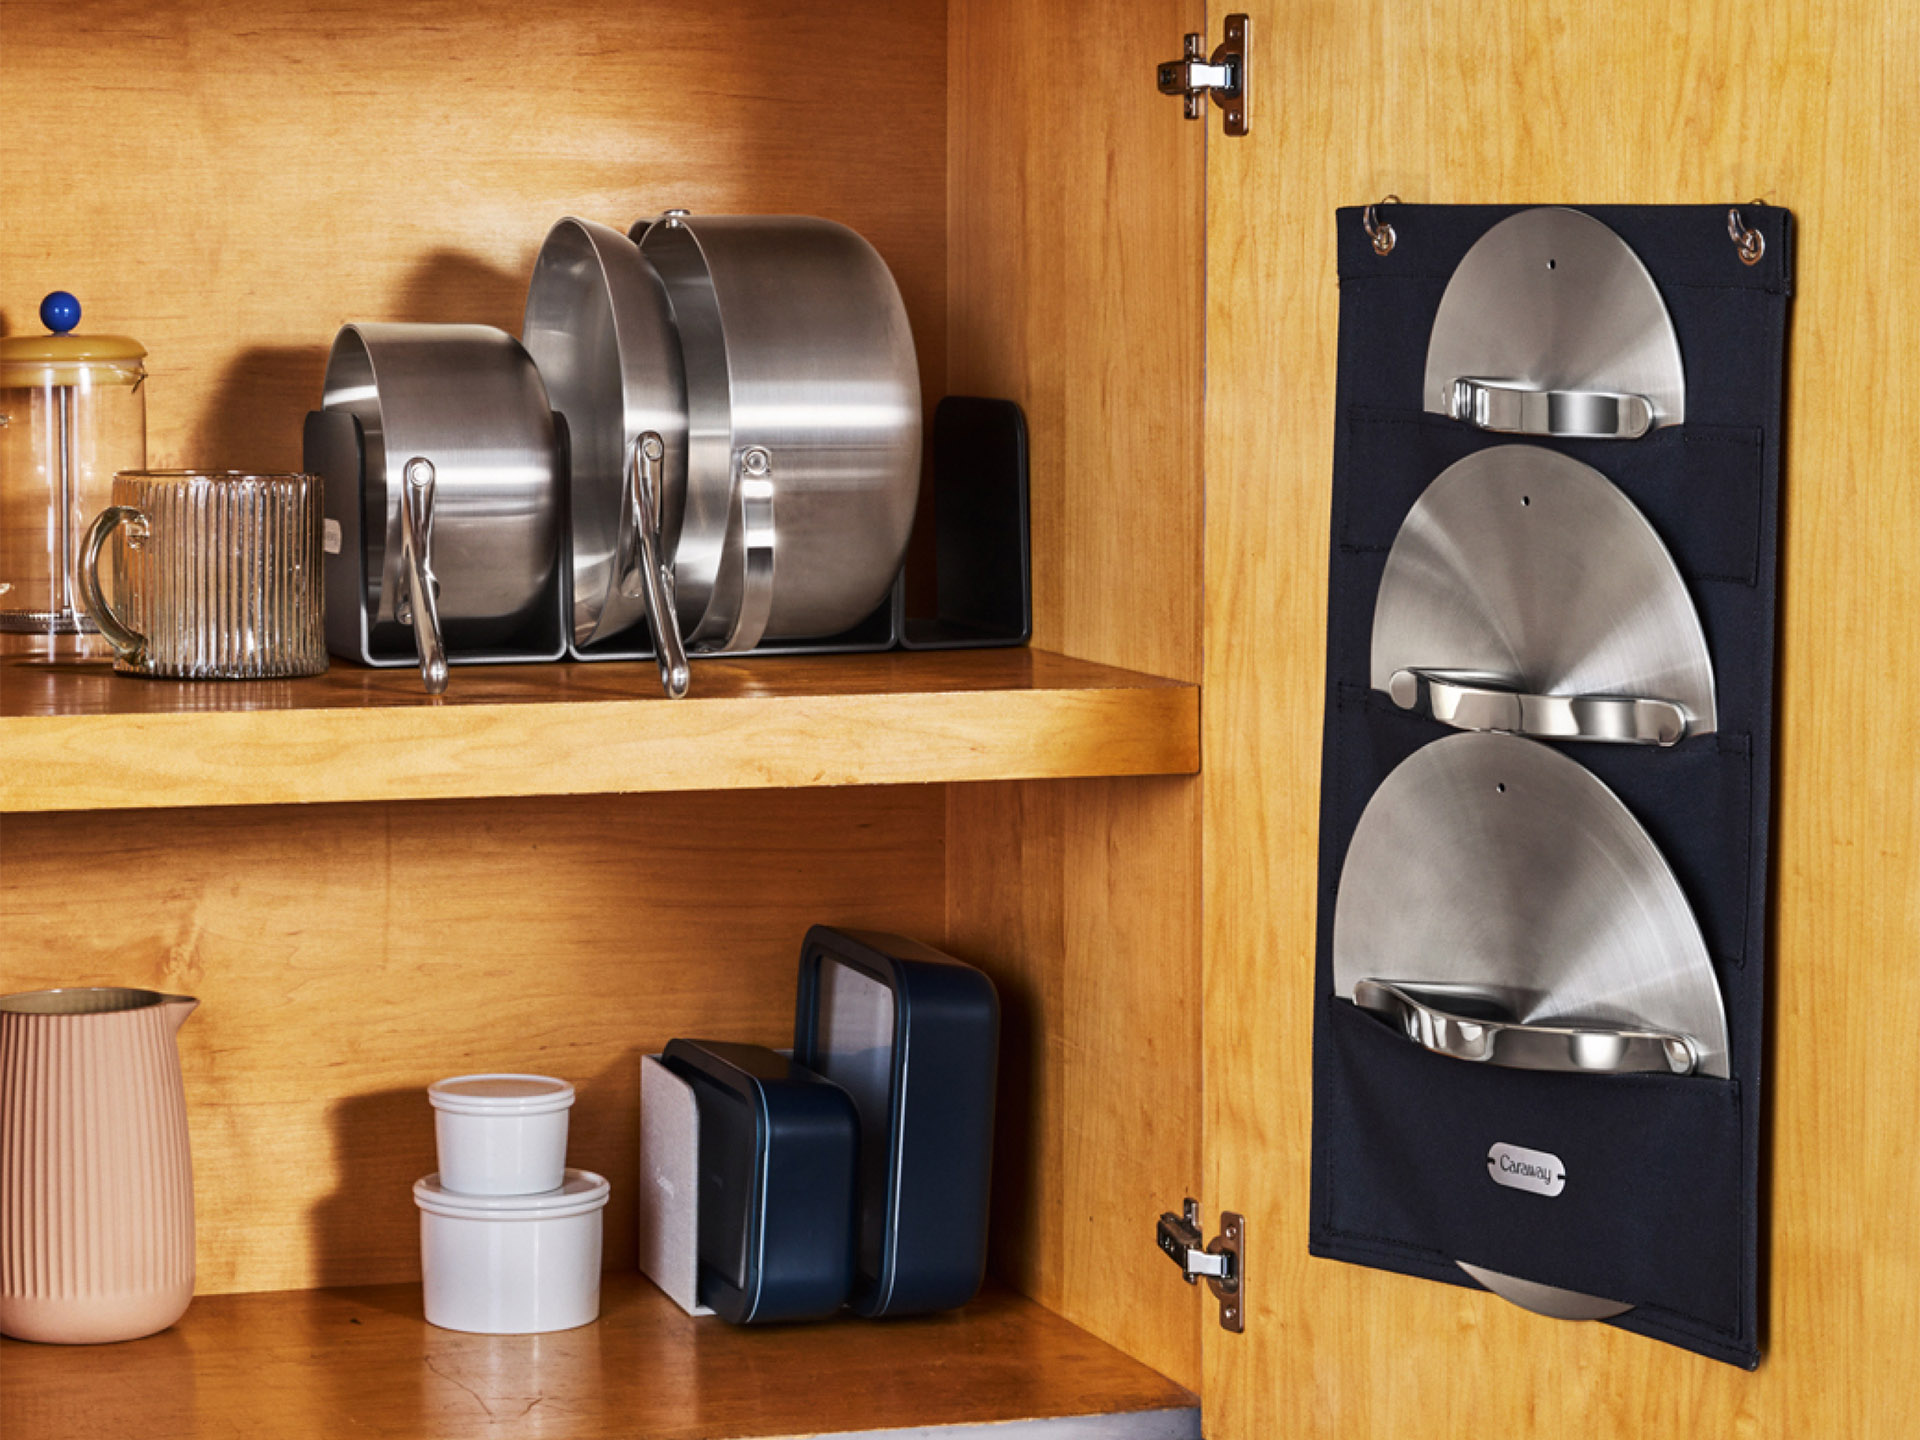 Cookware Set - Stainless Steel - Lifestyle Storage in Cabinet